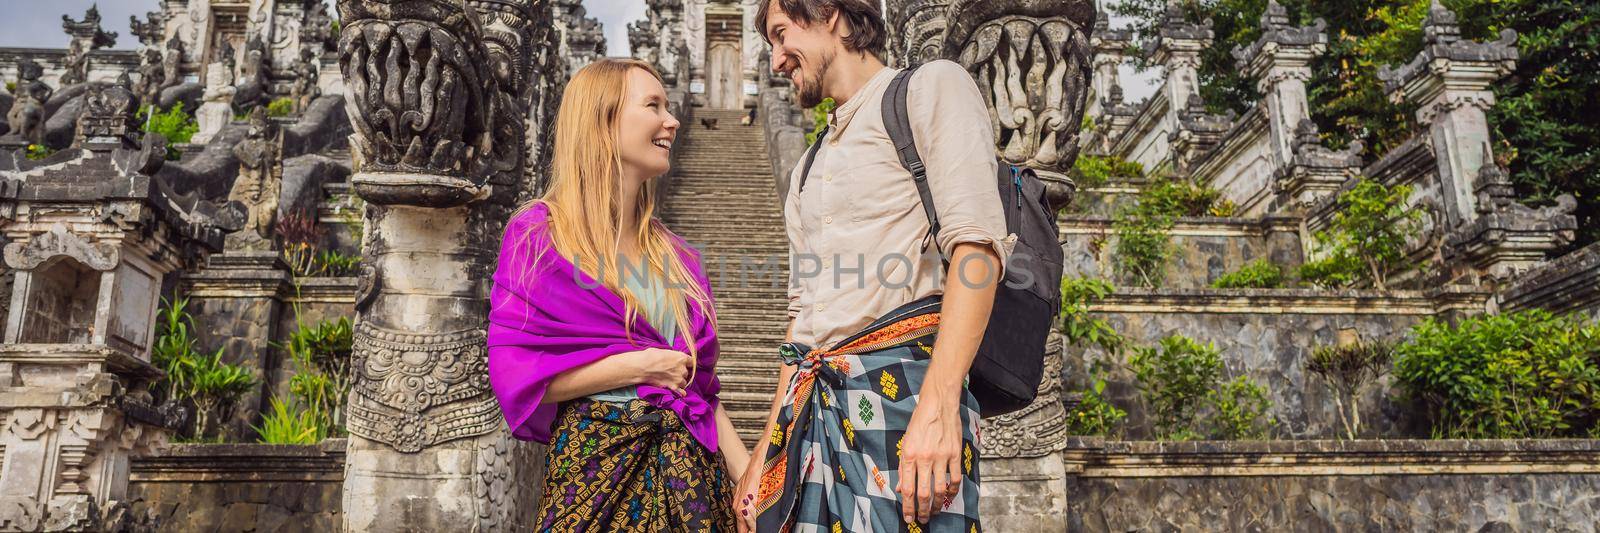 BANNER, LONG FORMAT Happy couple of tourists on background of Three stone ladders in beautiful Pura Lempuyang Luhur temple. Summer landscape with stairs to temple. Paduraksa portals marking entrance to middle sanctum jaba tengah of Pura Penataran Agung, Bali.